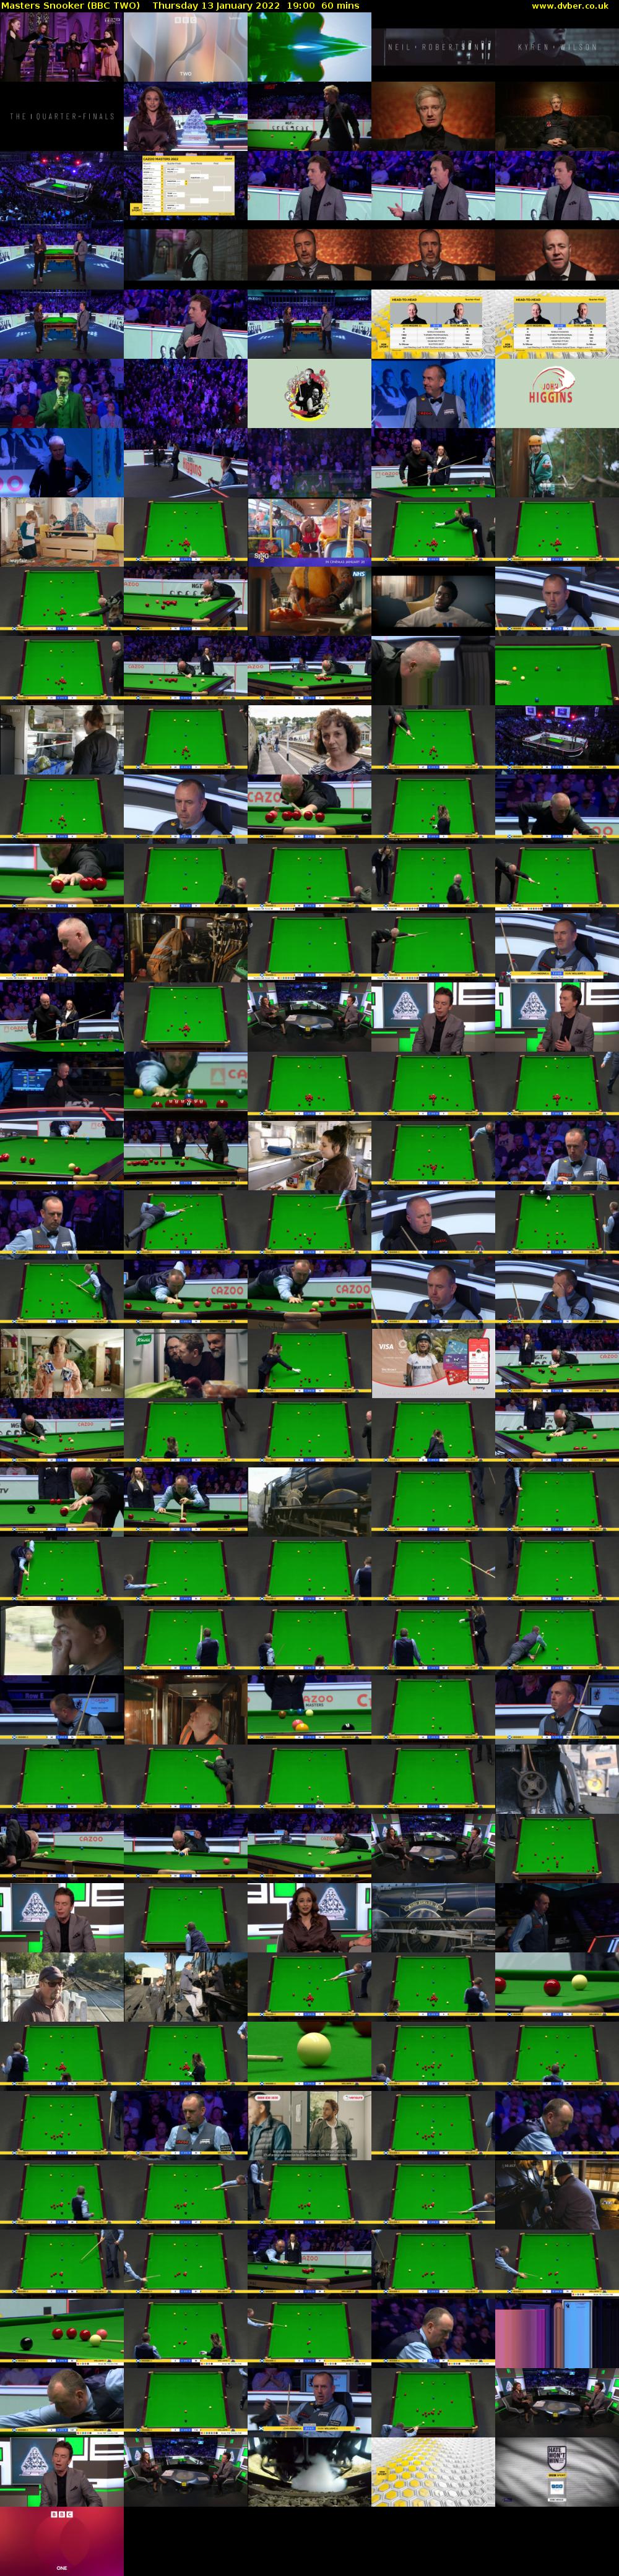 Masters Snooker (BBC TWO) Thursday 13 January 2022 19:00 - 20:00